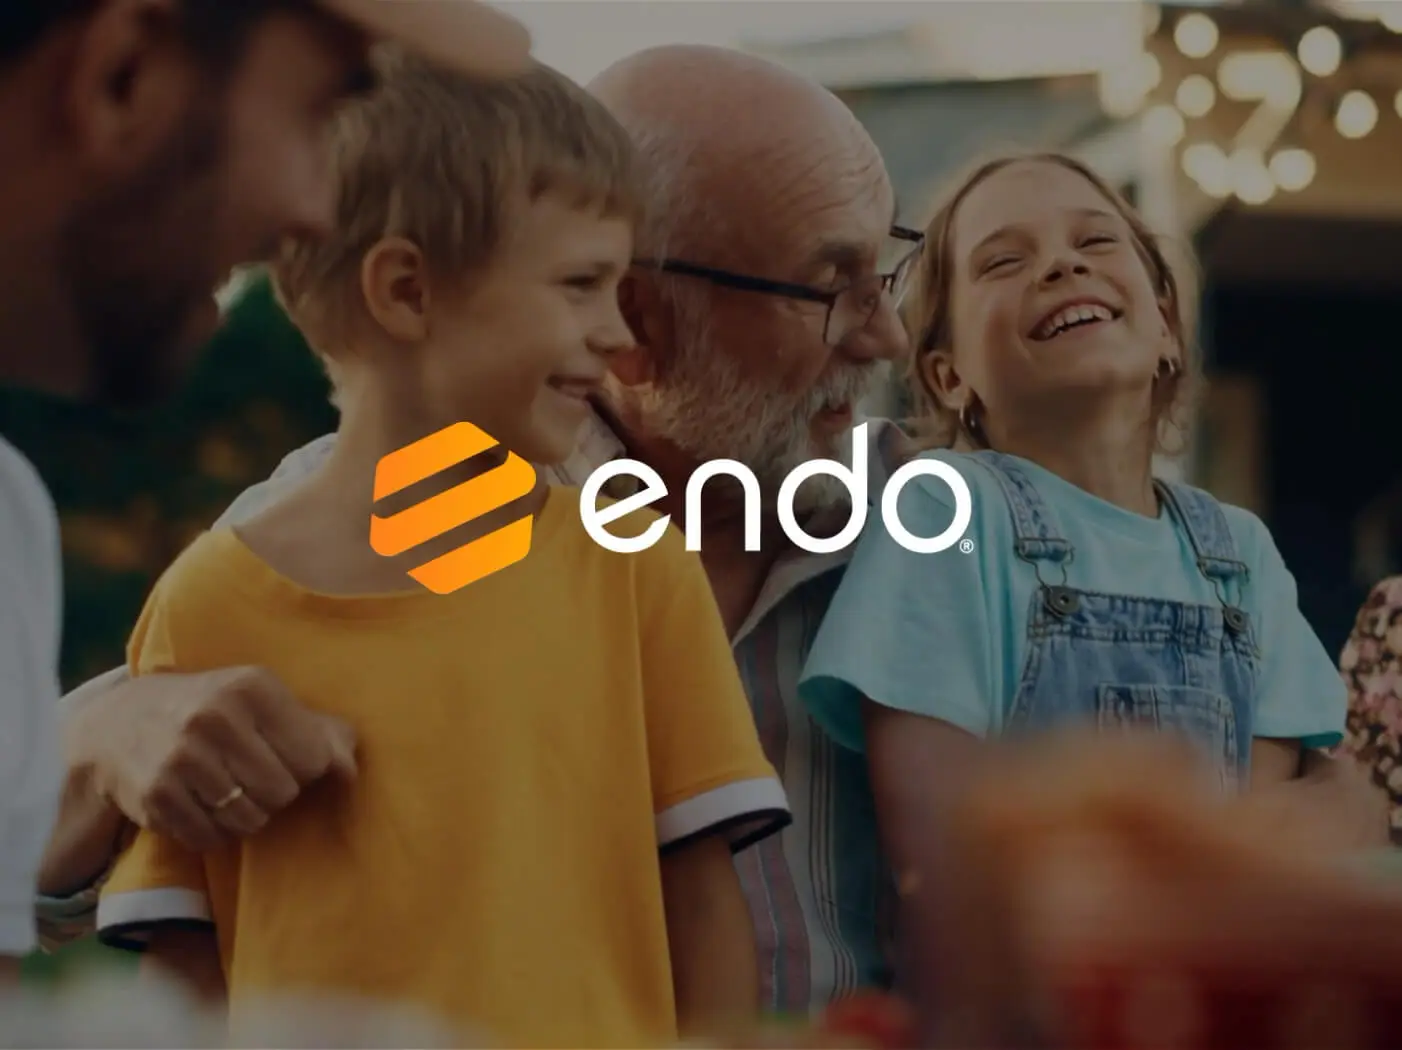 A happy family and the Endo logo